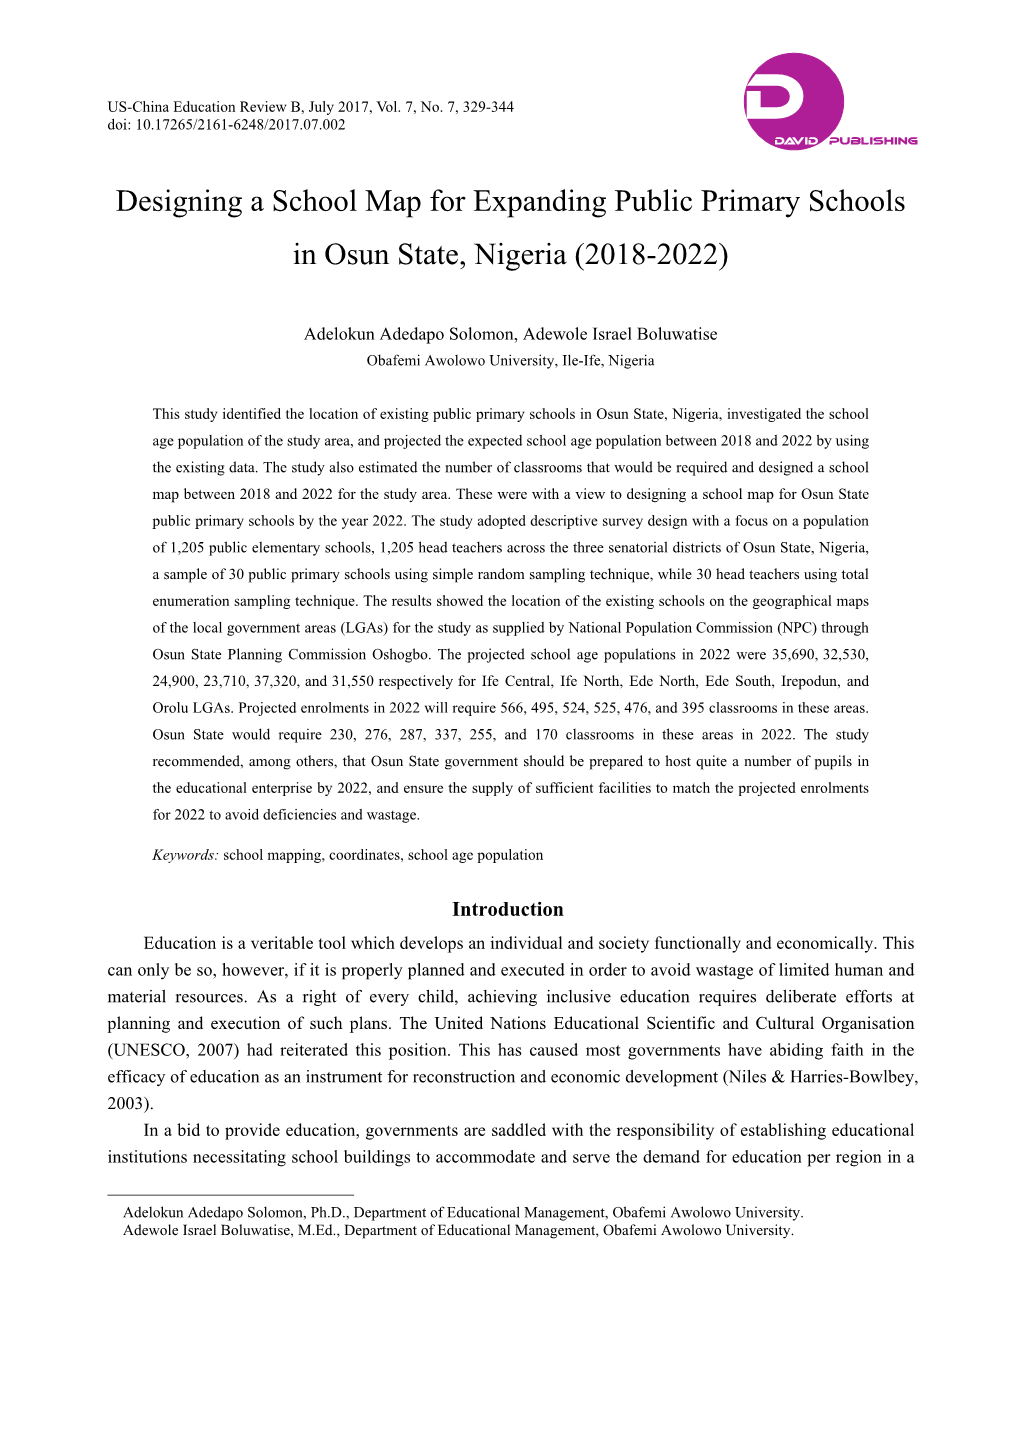 Designing a School Map for Expanding Public Primary Schools in Osun State, Nigeria (2018-2022)